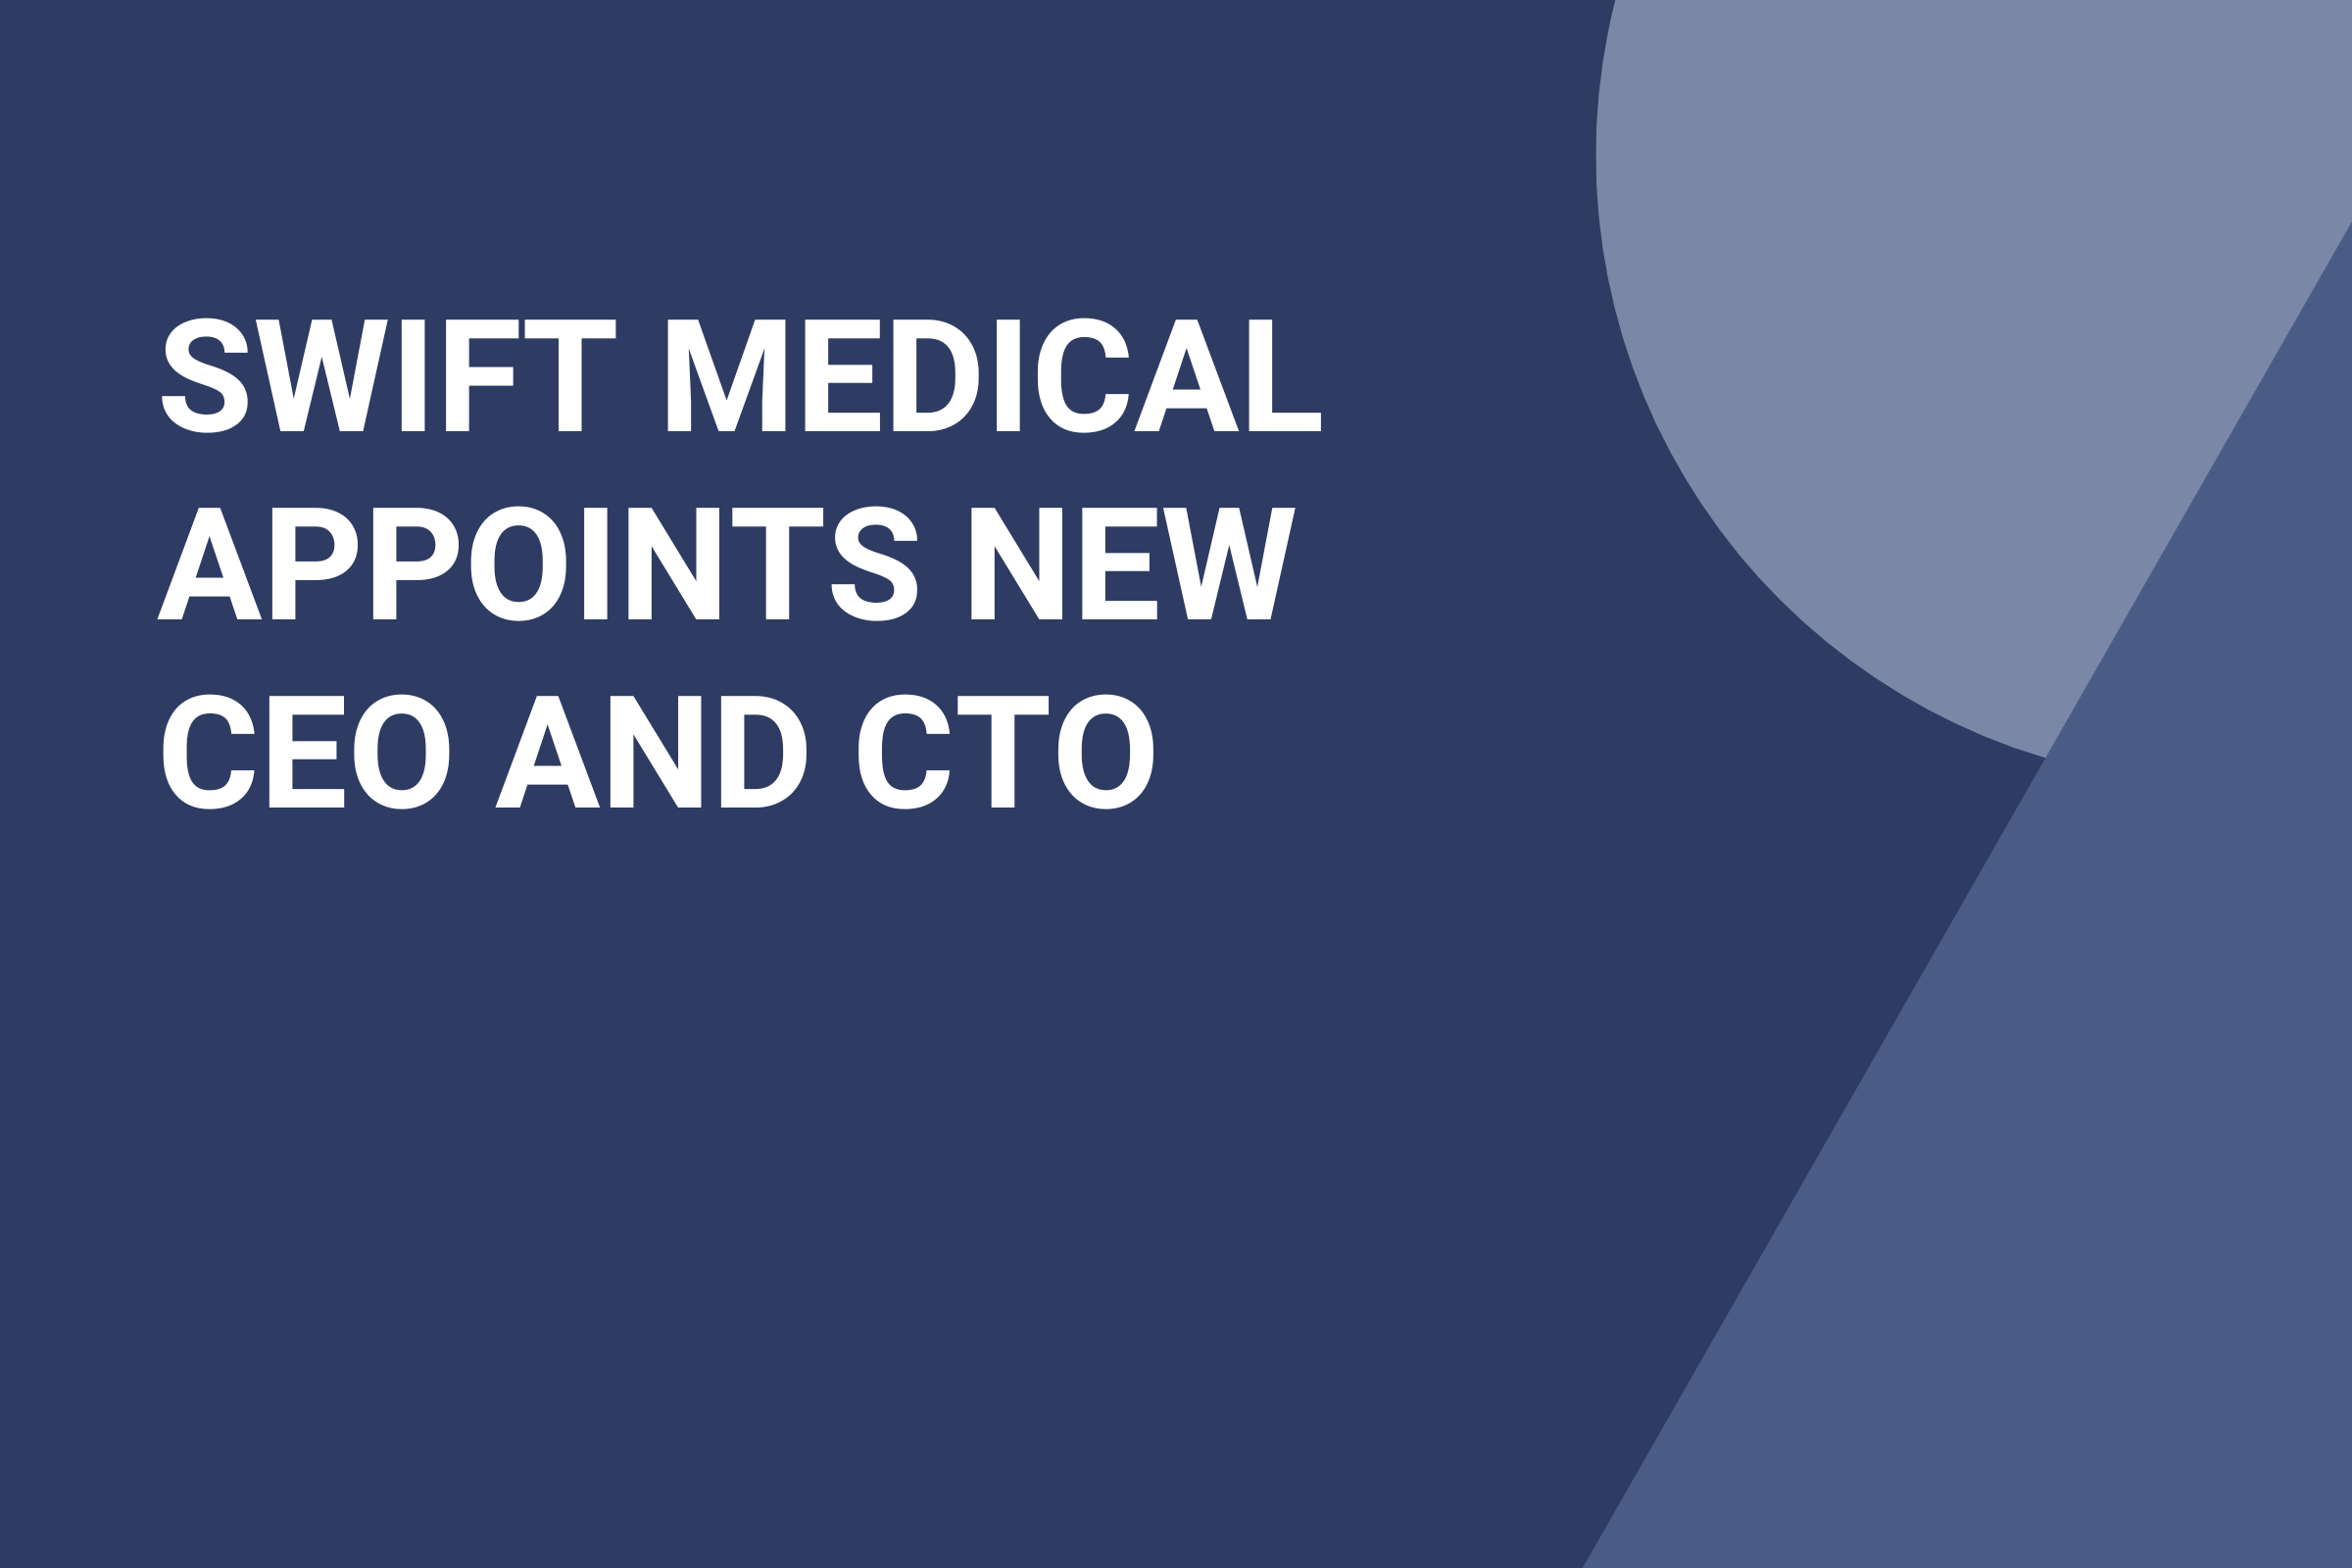 Swift Medical Appoints New CEO and CTO